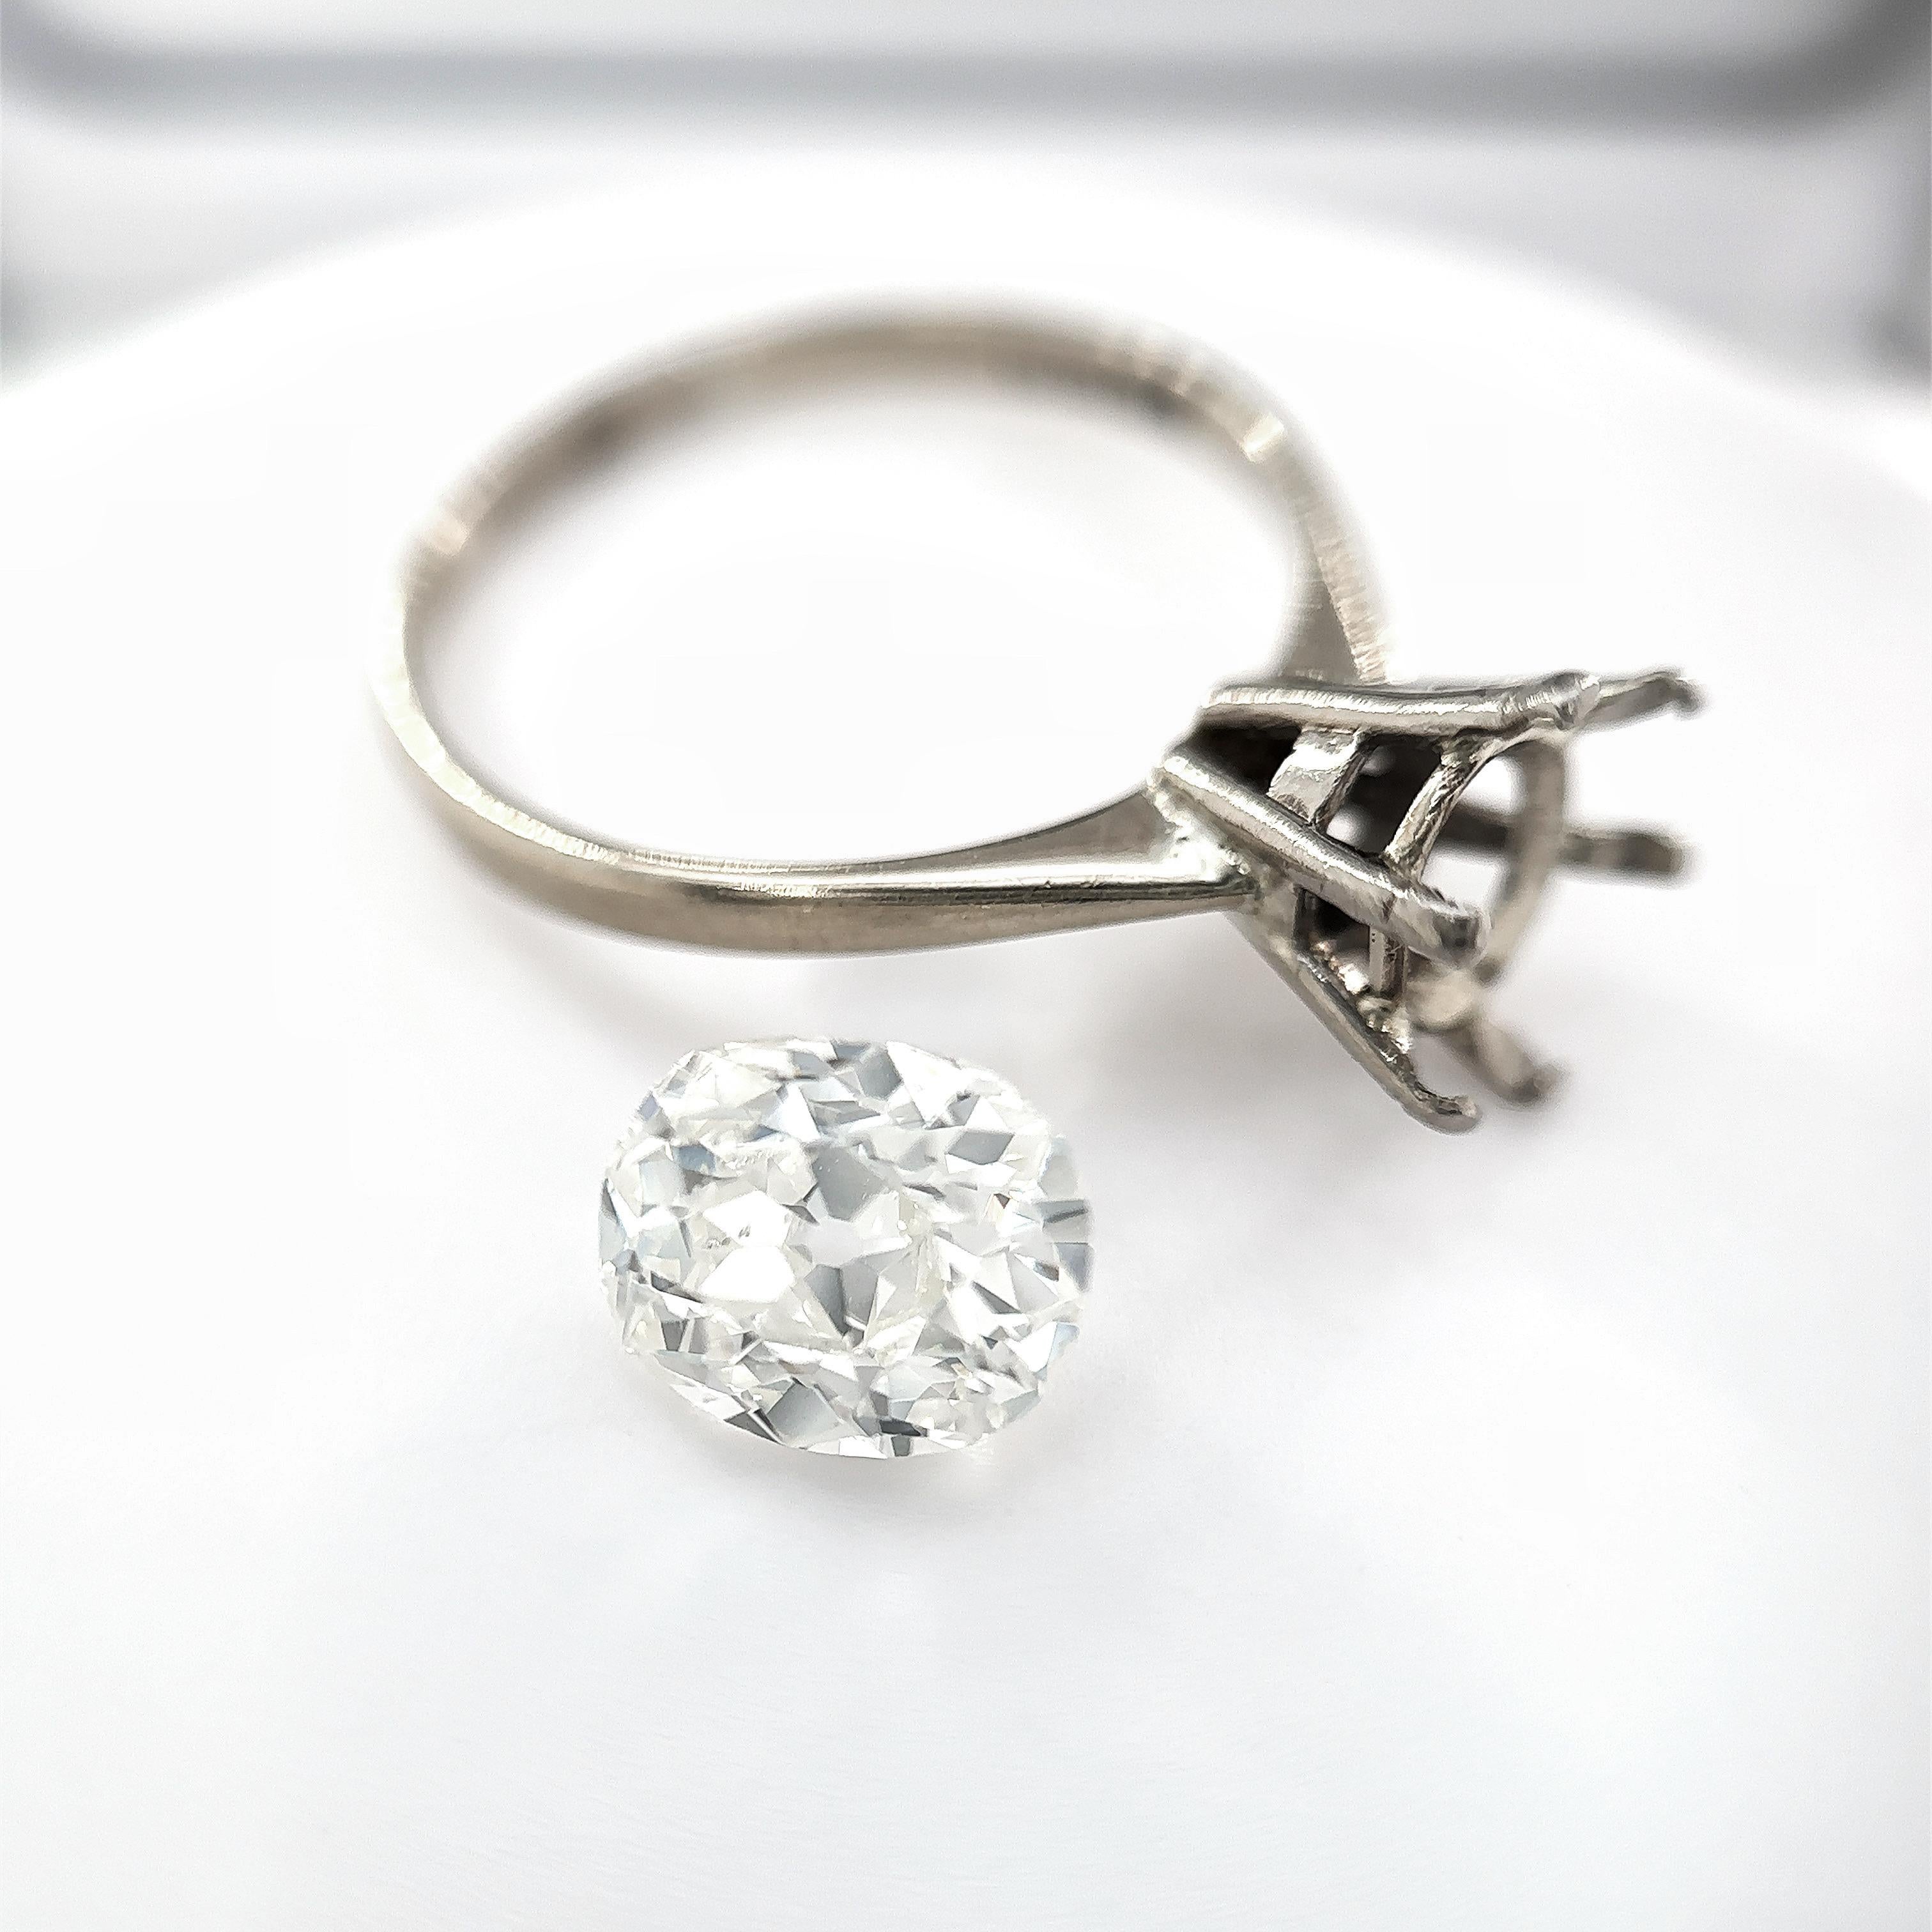 This exquisite 1.69 carat old mine cut diamond ring is truly a timeless treasure. Crafted with utmost precision and attention to detail, this ring showcases the exceptional beauty and brilliance of a rare old mine cut diamond.
 
The centre piece of